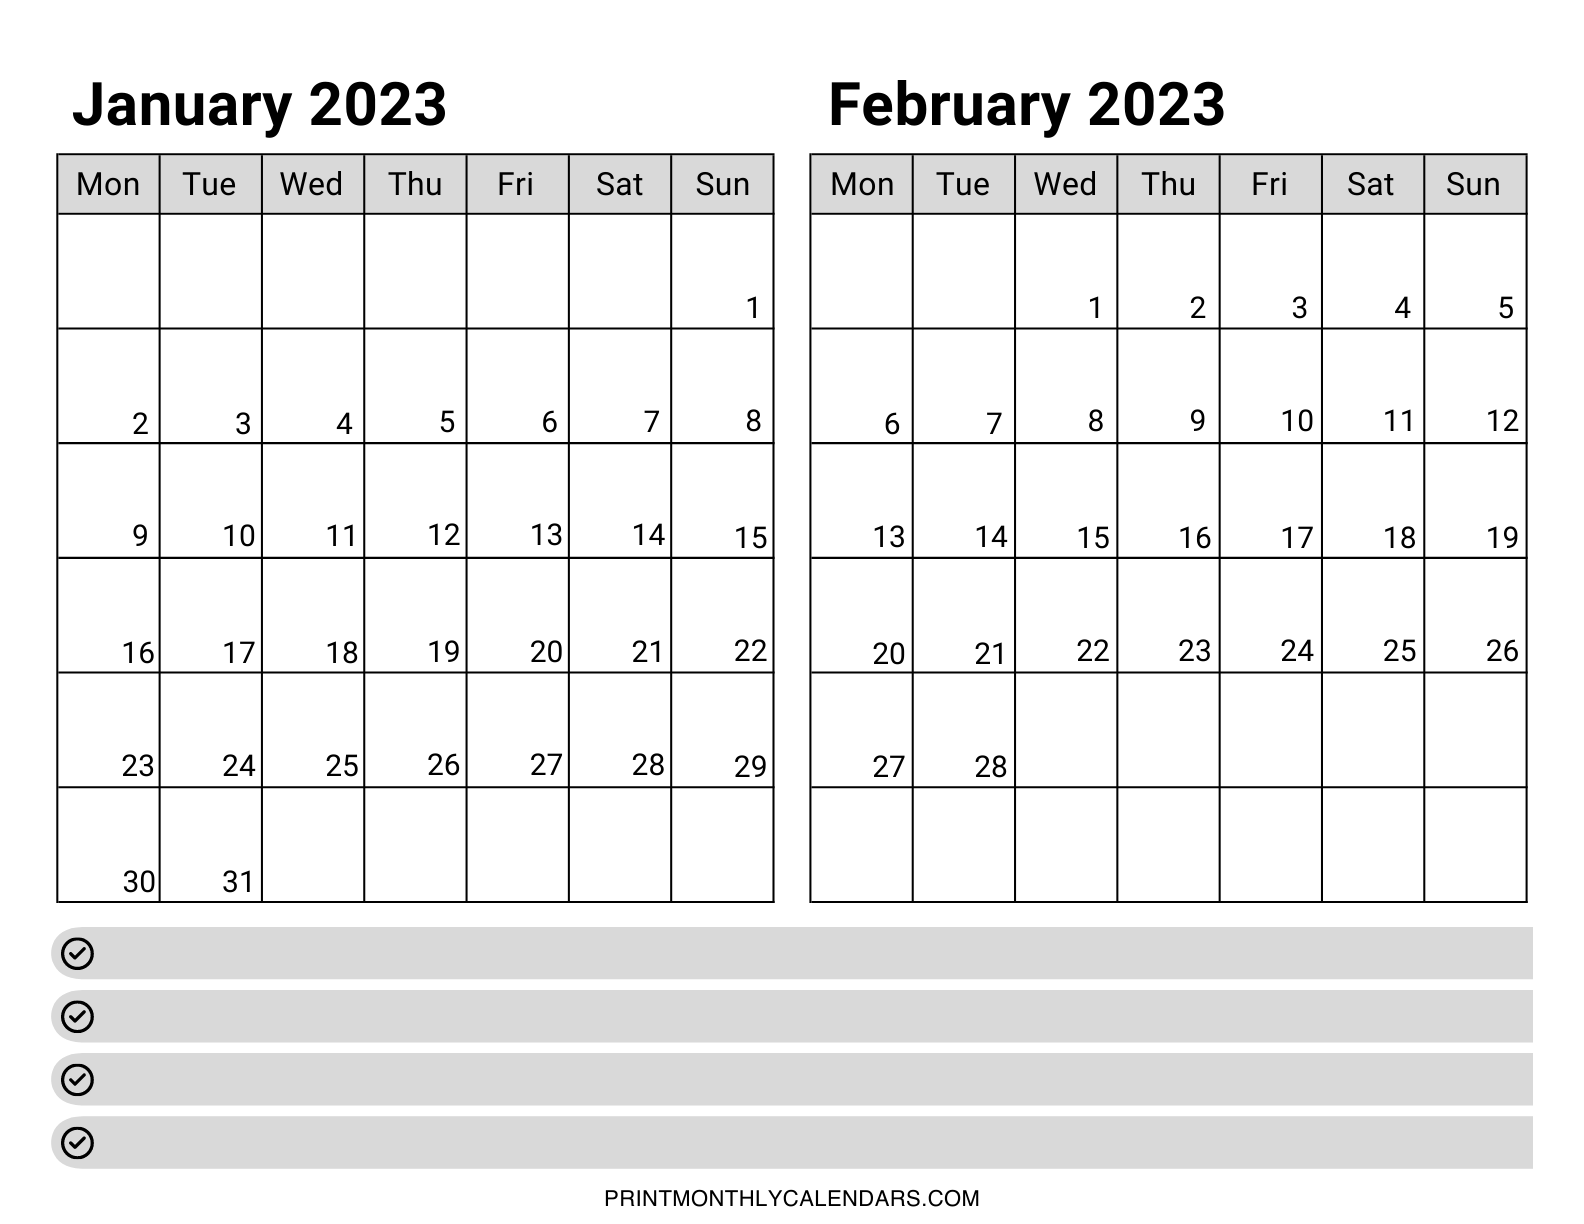 The calendar grid for January to February 2023 is written out horizontally on one page. Blank rows are provided at the bottom of the design for writing down notes, schedules, events, and dates.